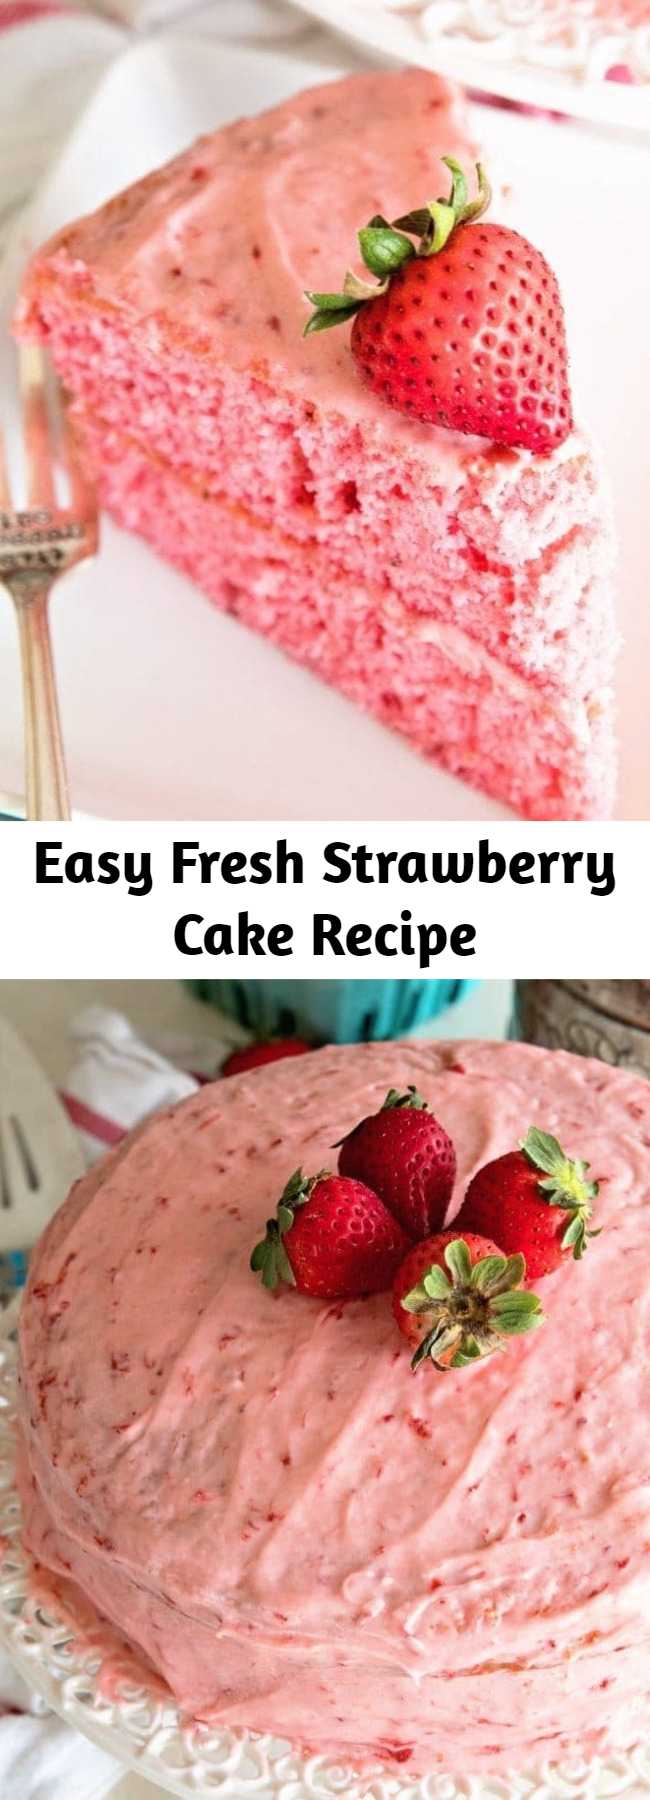 Easy Fresh Strawberry Cake Recipe - Starts with a Boxed Mix and is Dressed Up Fresh Strawberries and Iced with a Fresh Strawberry Frosting!